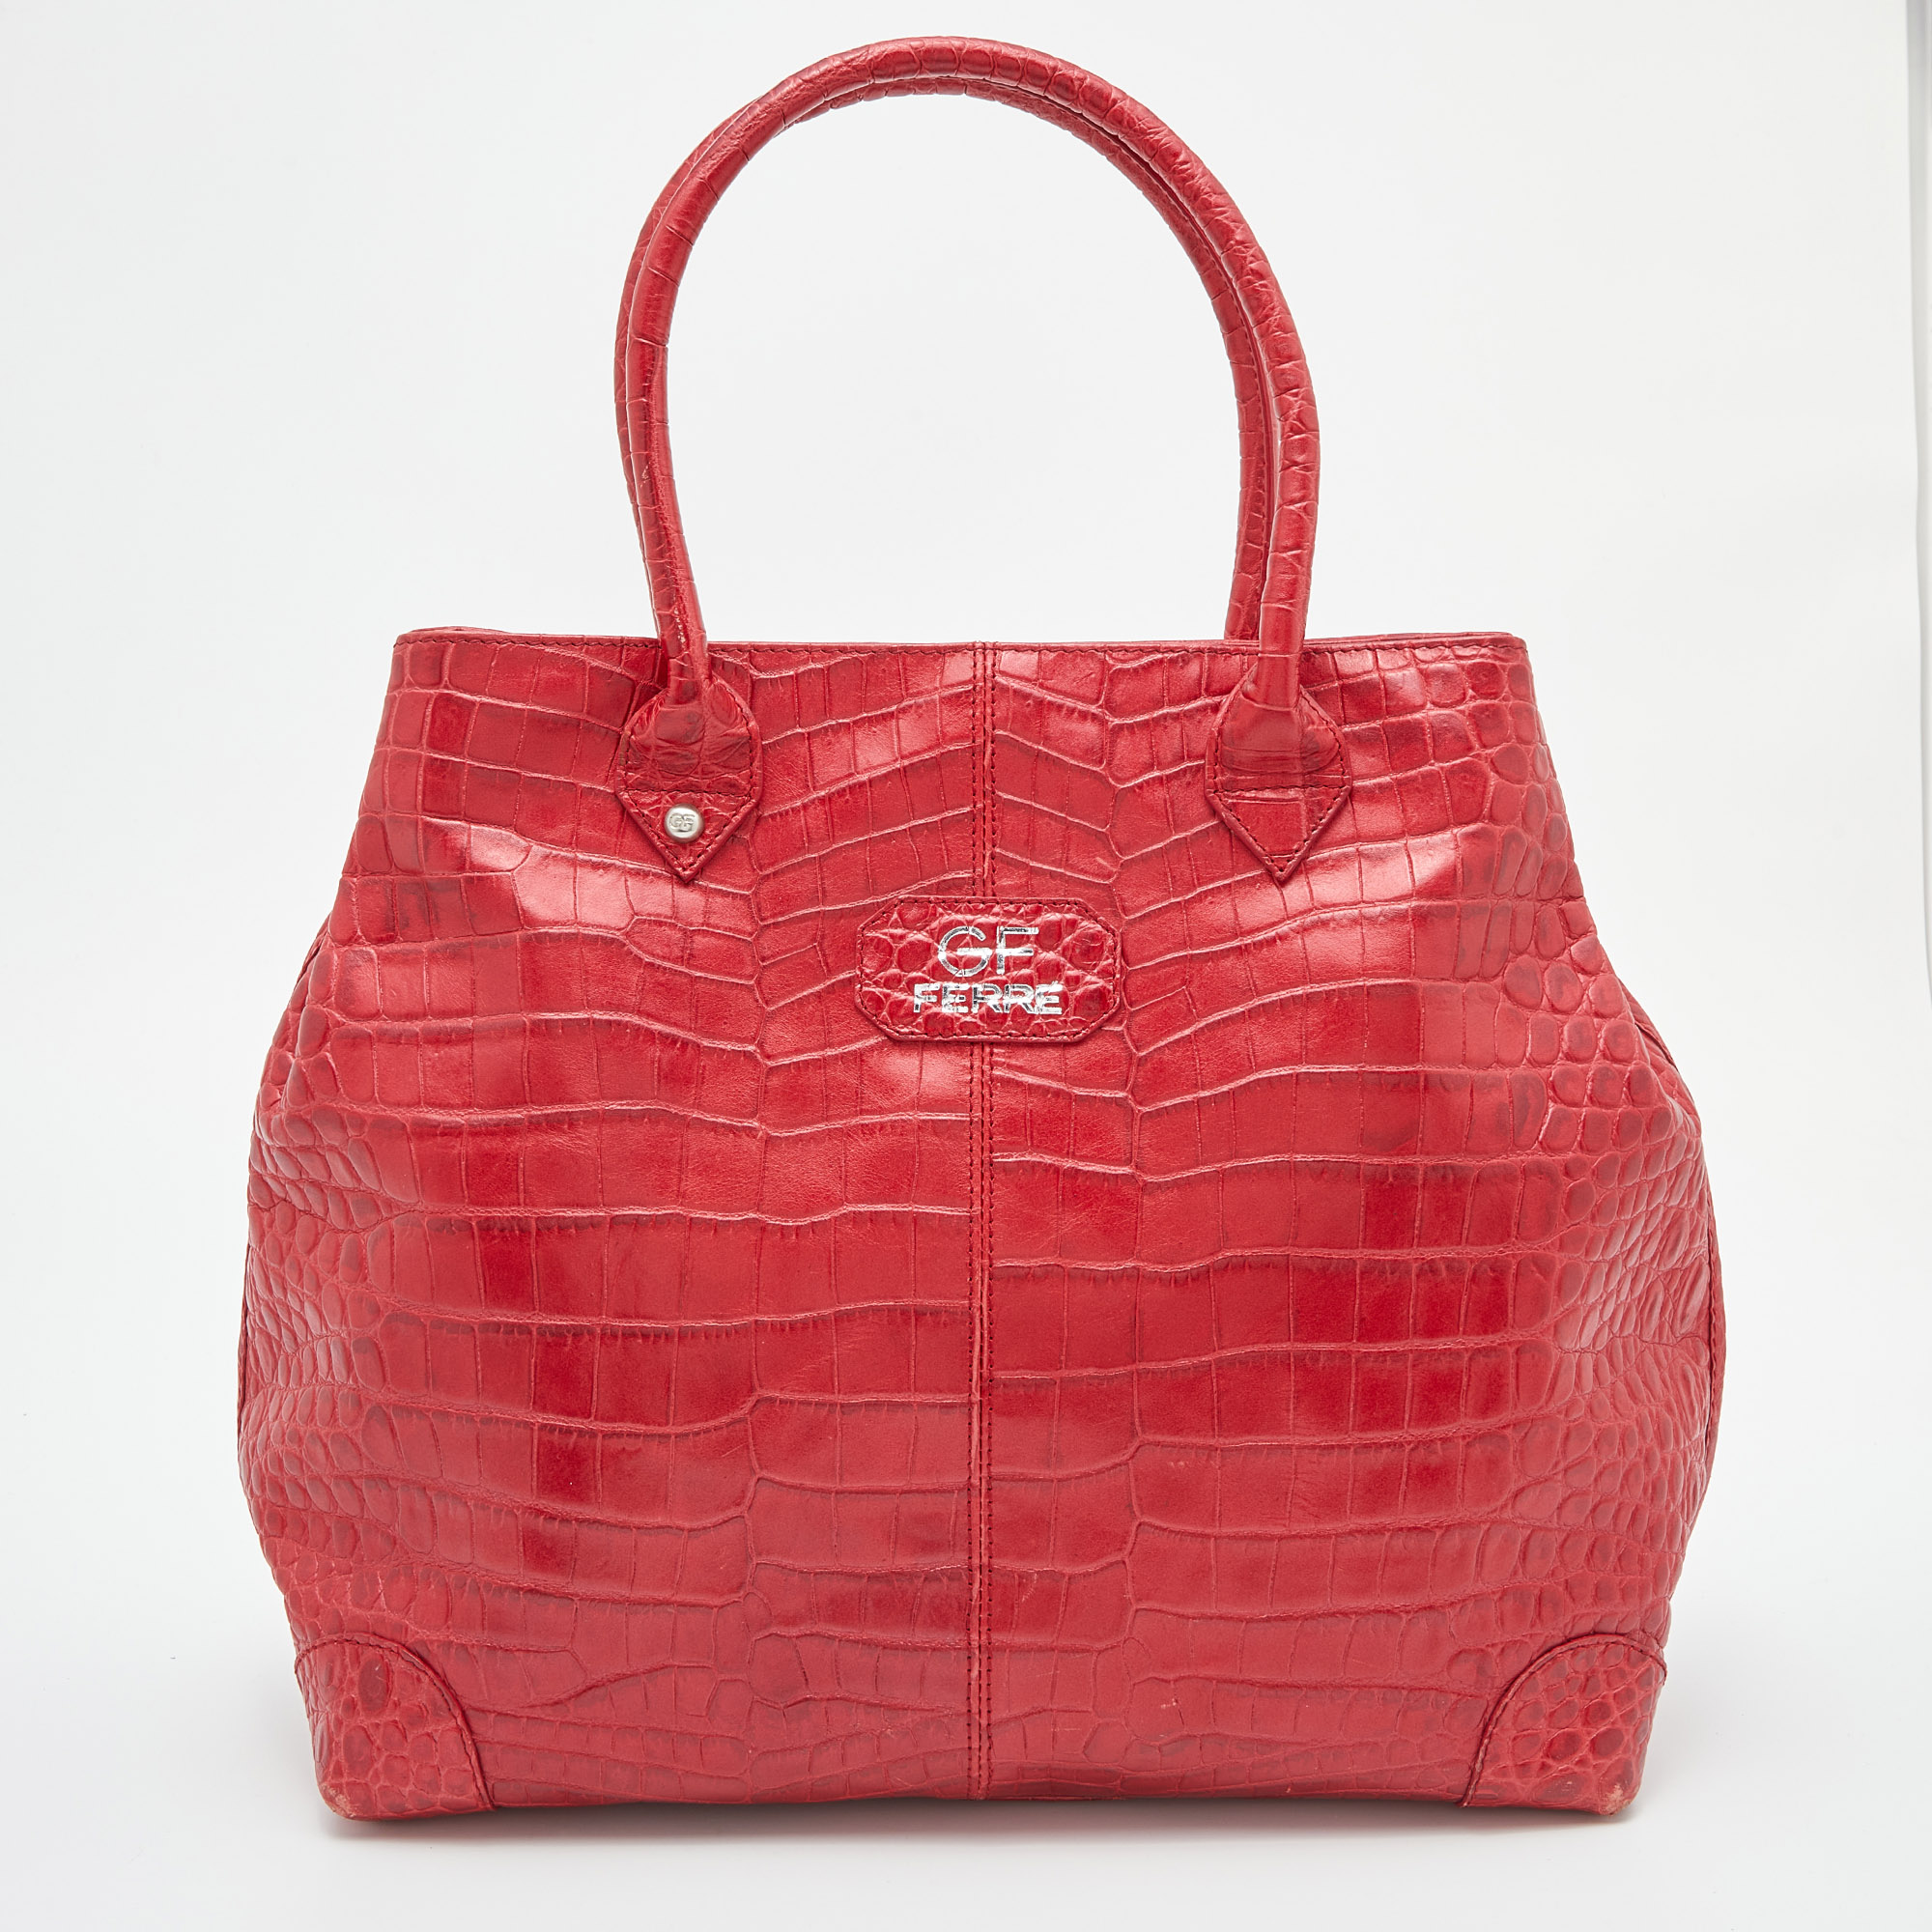 Pre-owned Gianfranco Ferre Red Croc Embossed Leather Tote